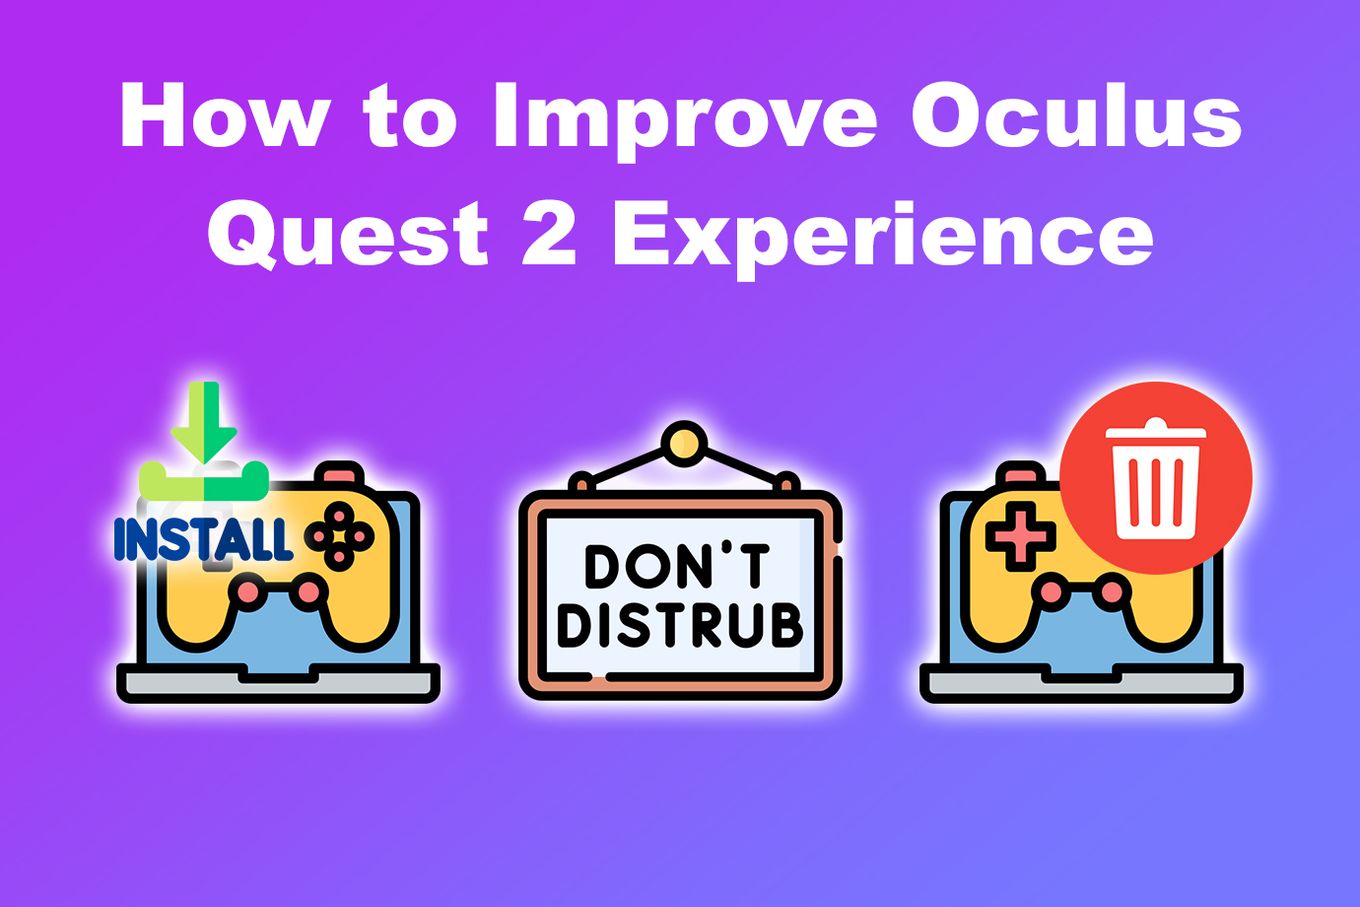 How to Improve Oculus Quest 2 Experience